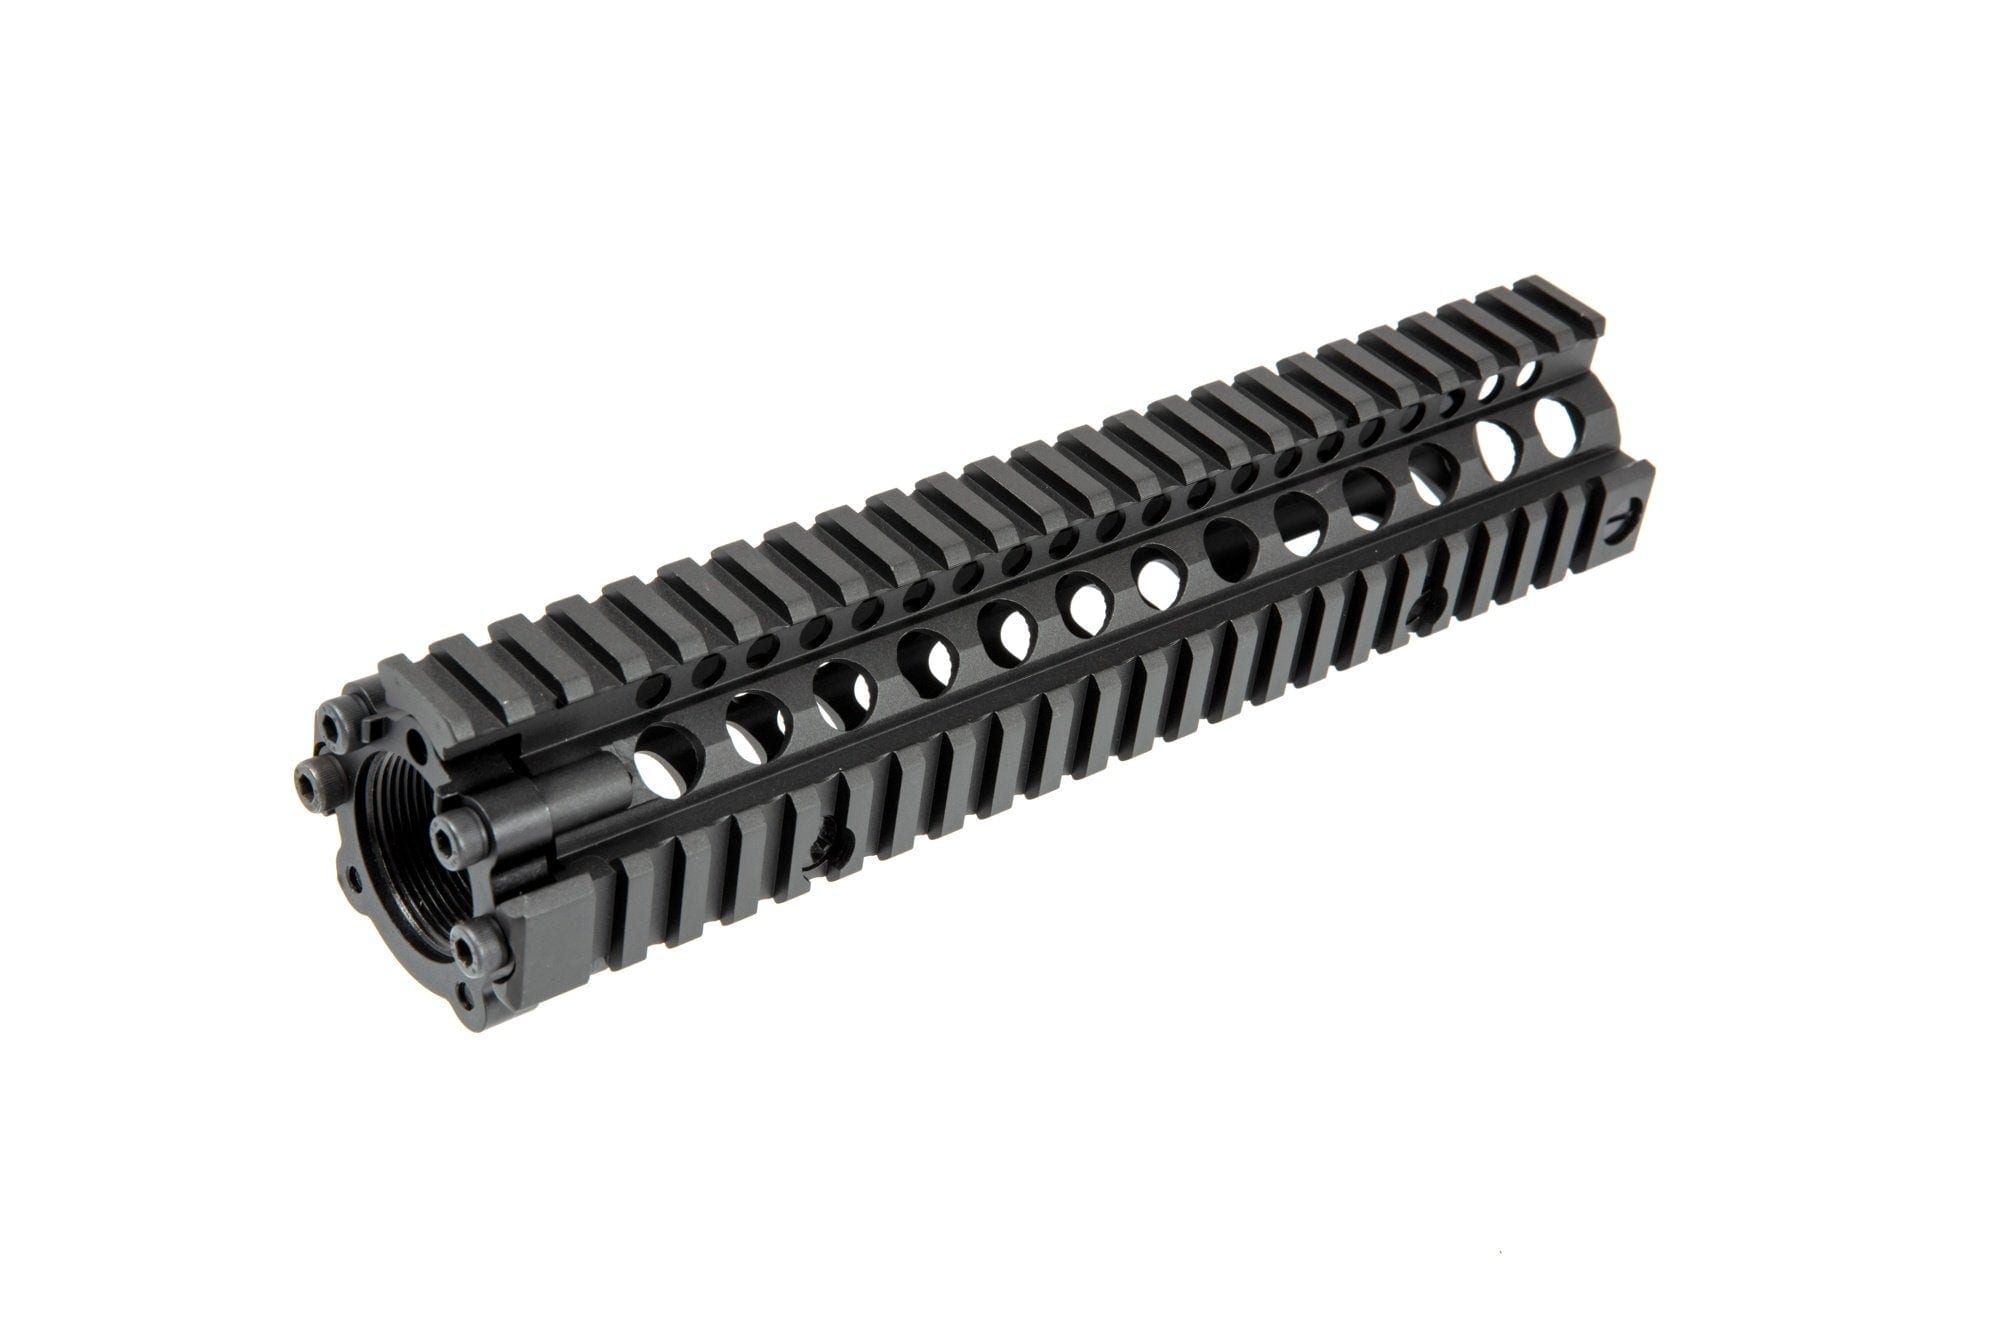 MK18 9.5" Mounting Rail for M4/M16 by CYMA on Airsoft Mania Europe